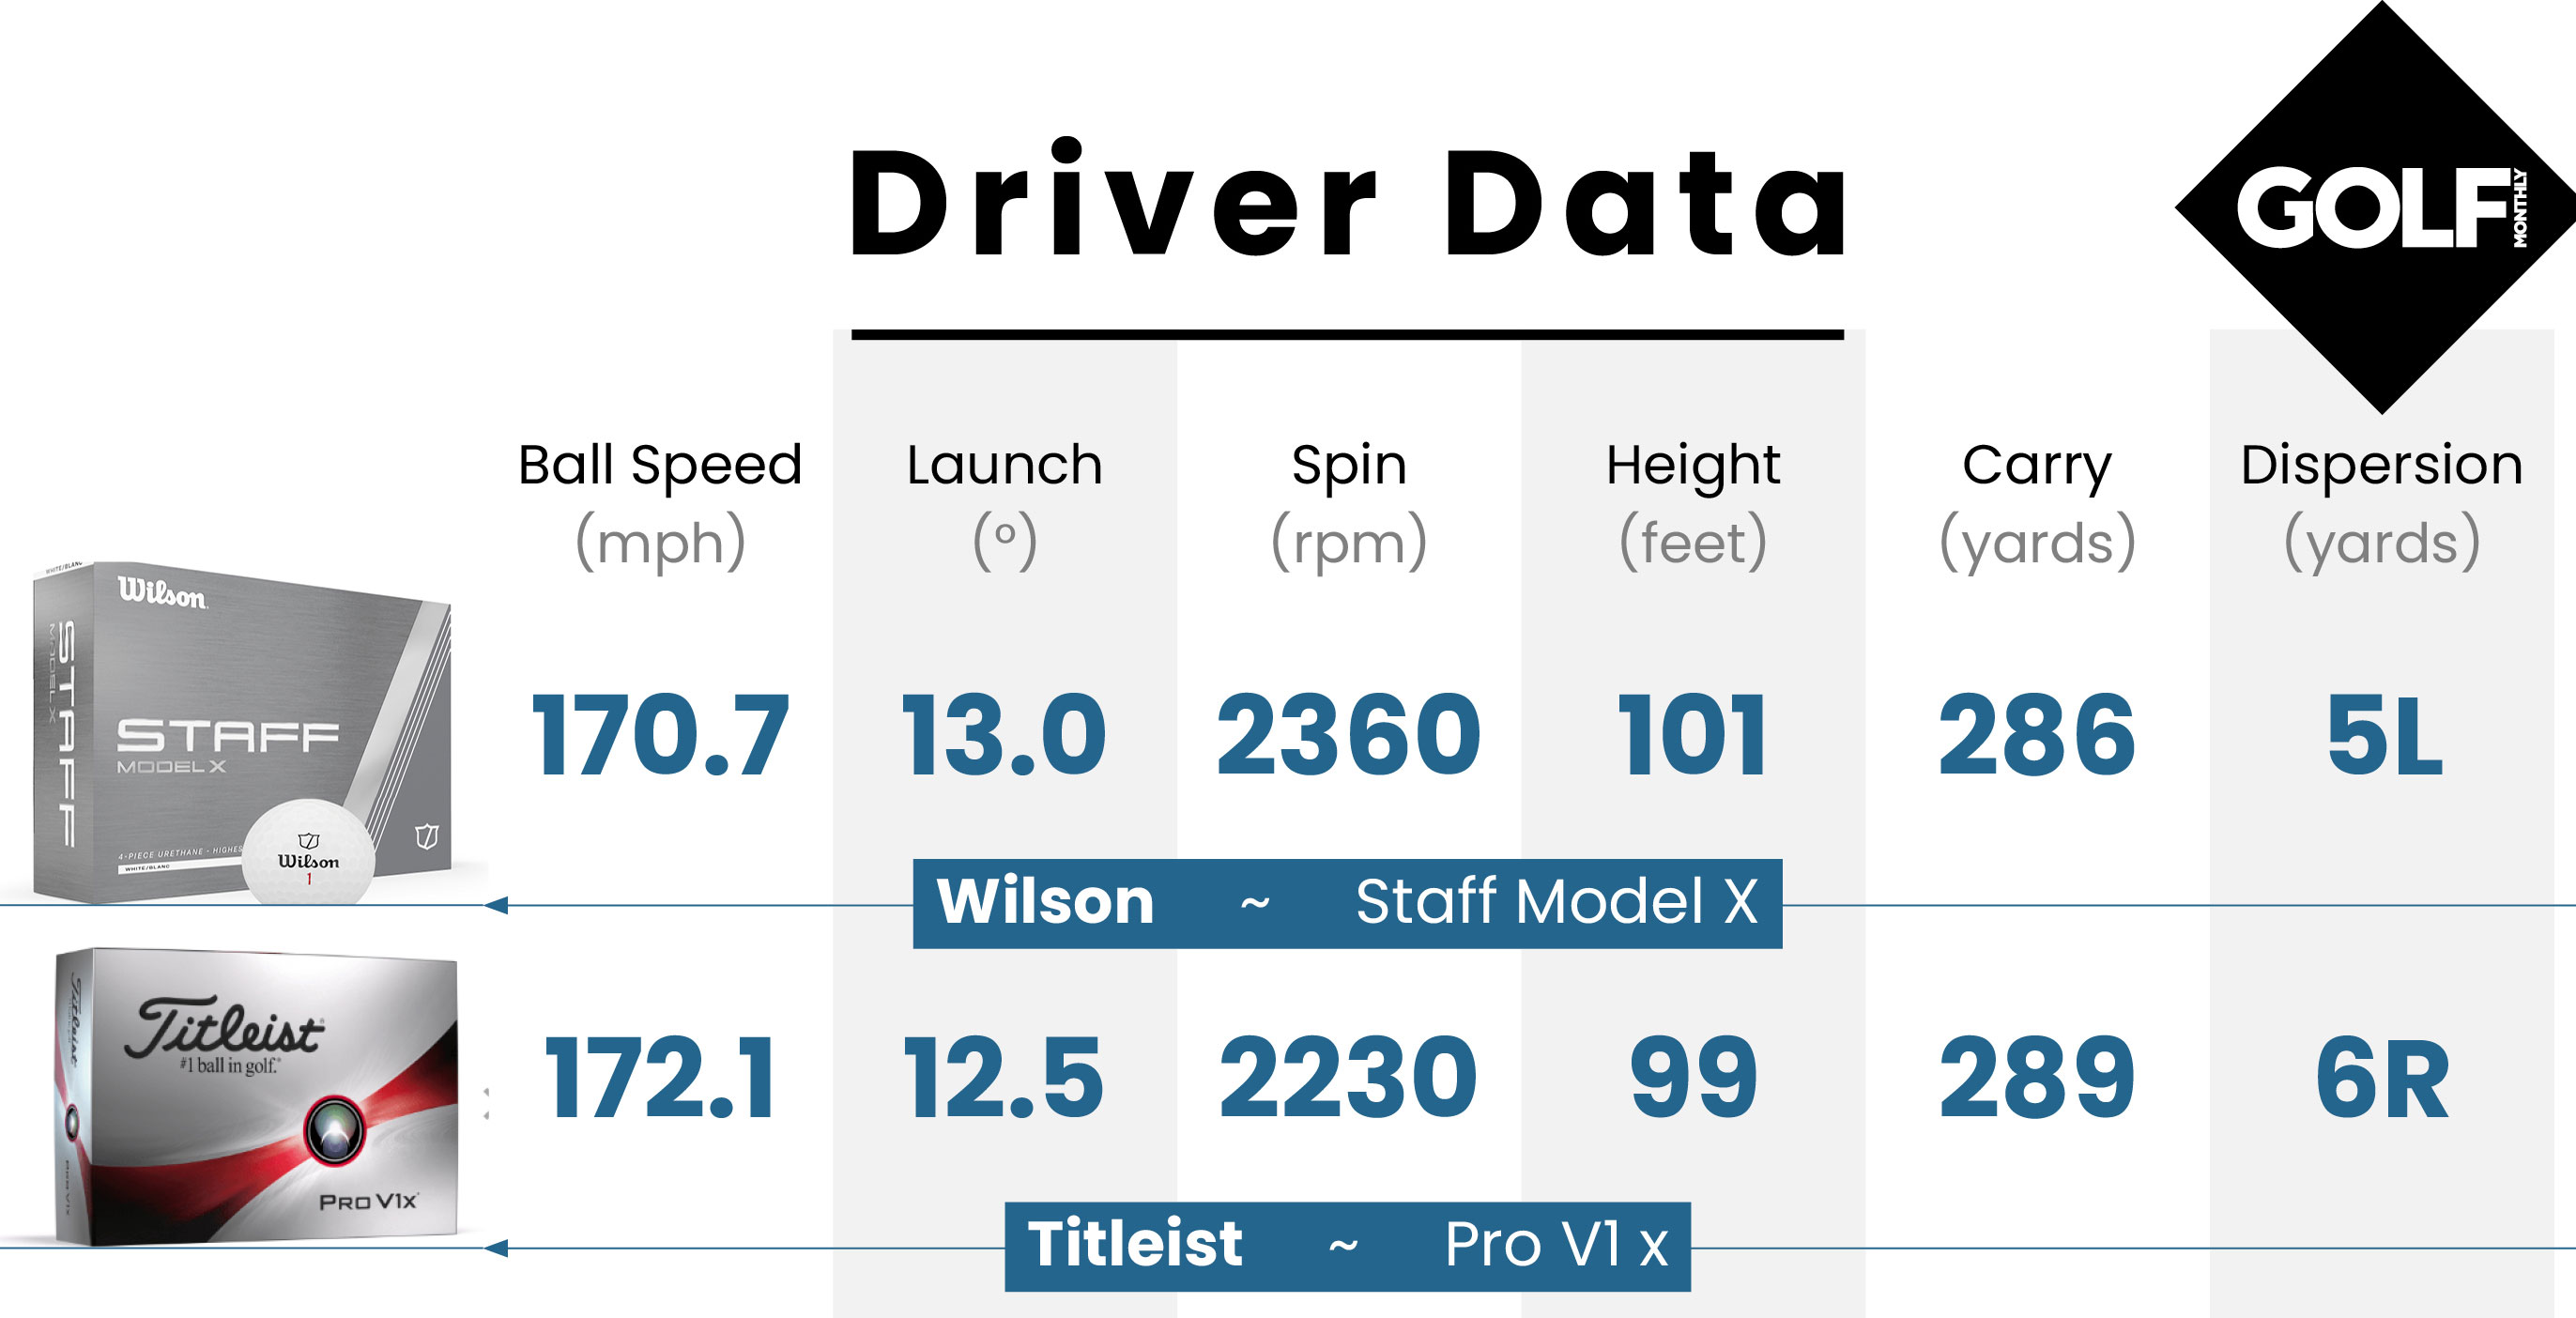 Driver data table for the Wilson Staff Model X Golf Ball